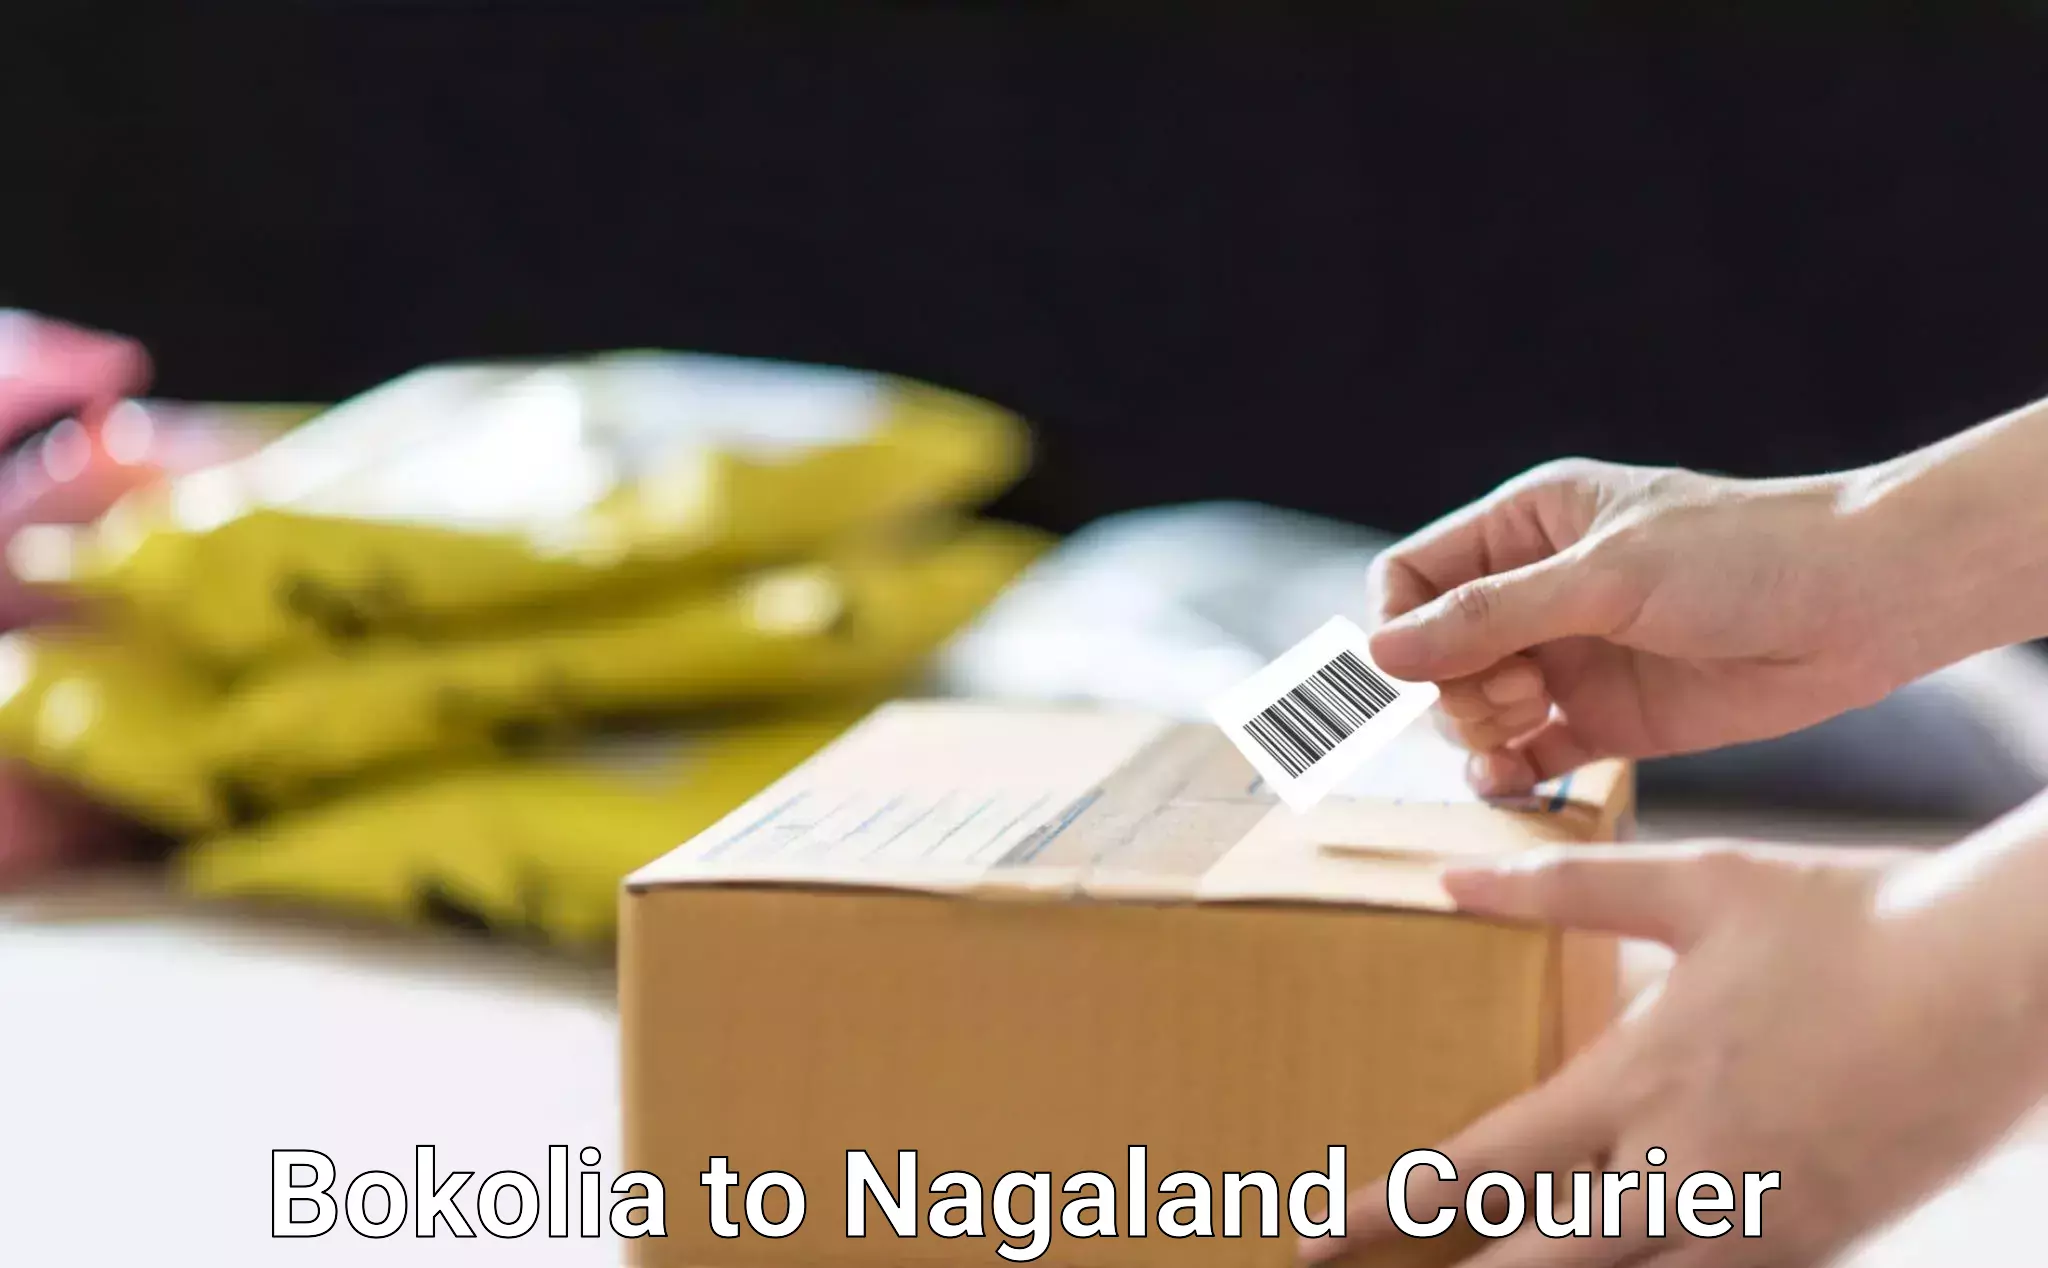 Reliable delivery network Bokolia to Nagaland